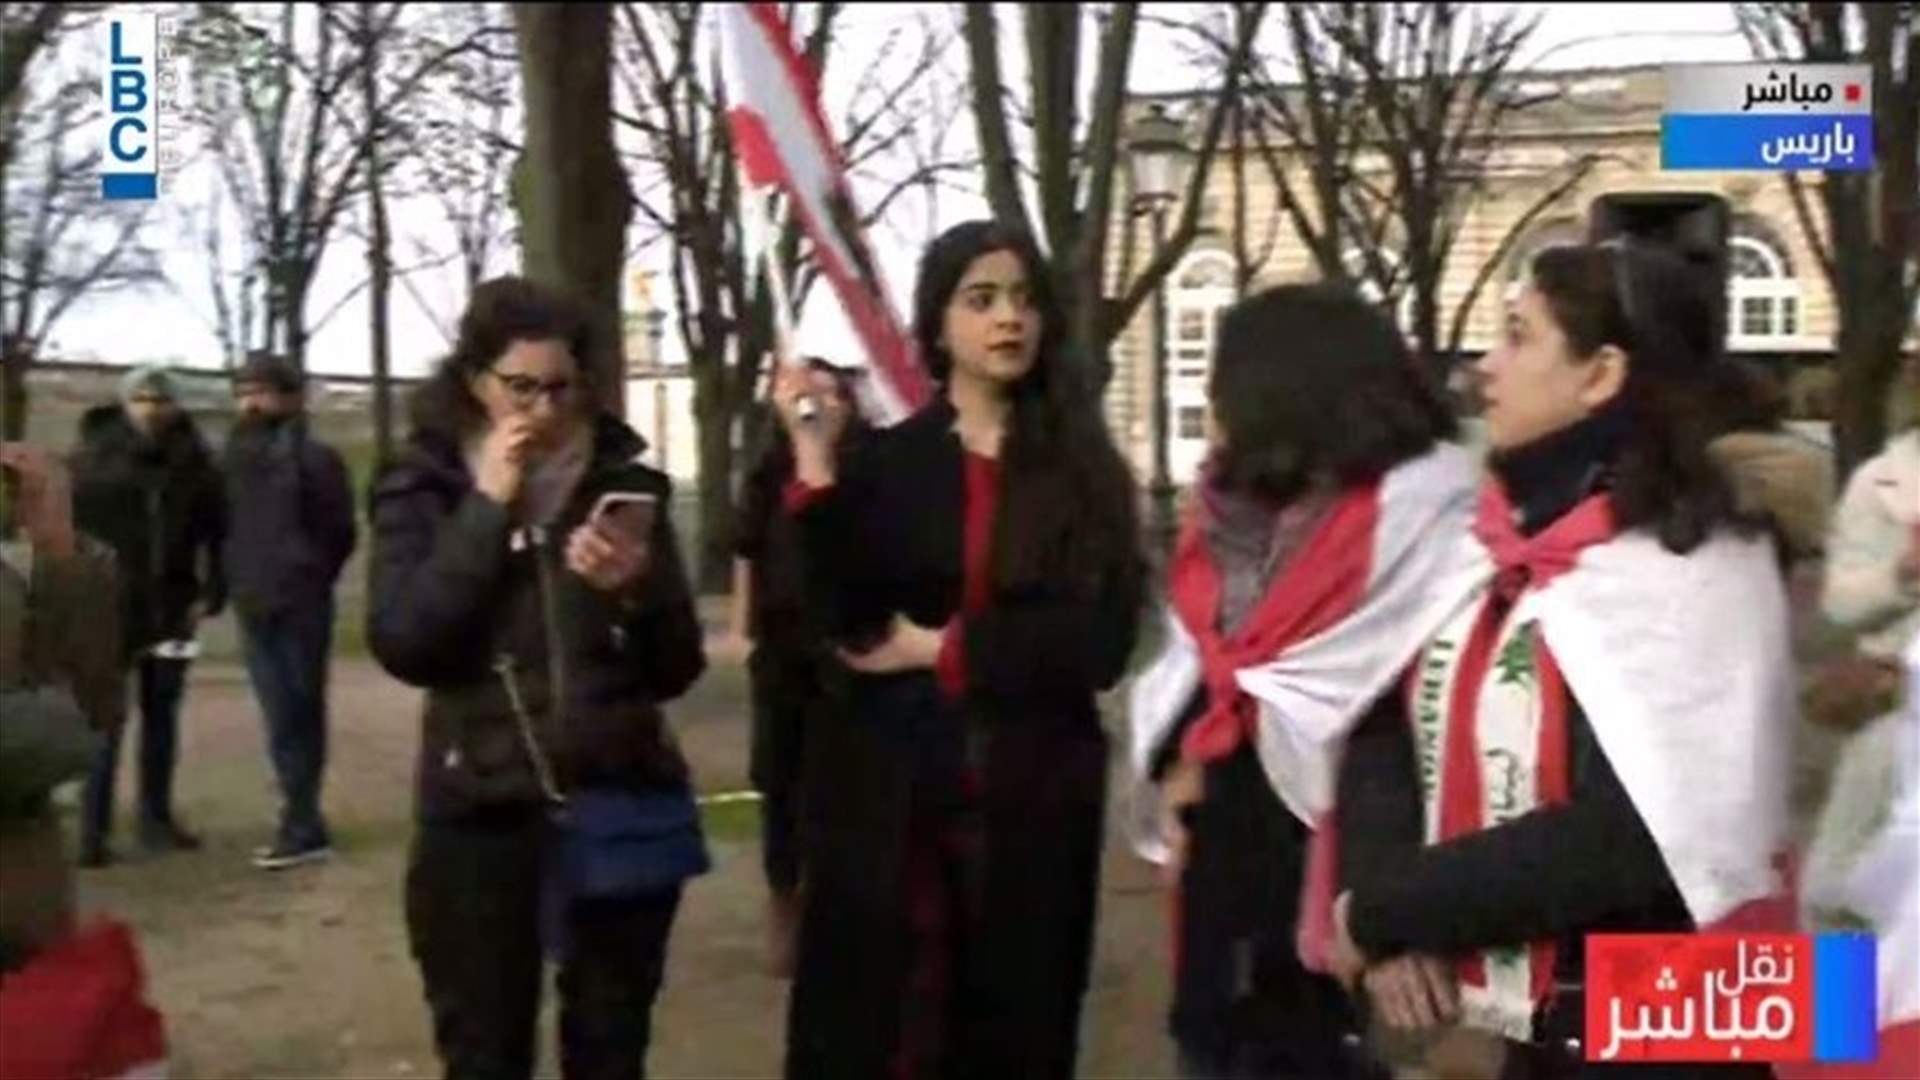 Lebanese nationals stage protest outside French Foreign Ministry in Paris during ISG meeting (Video)